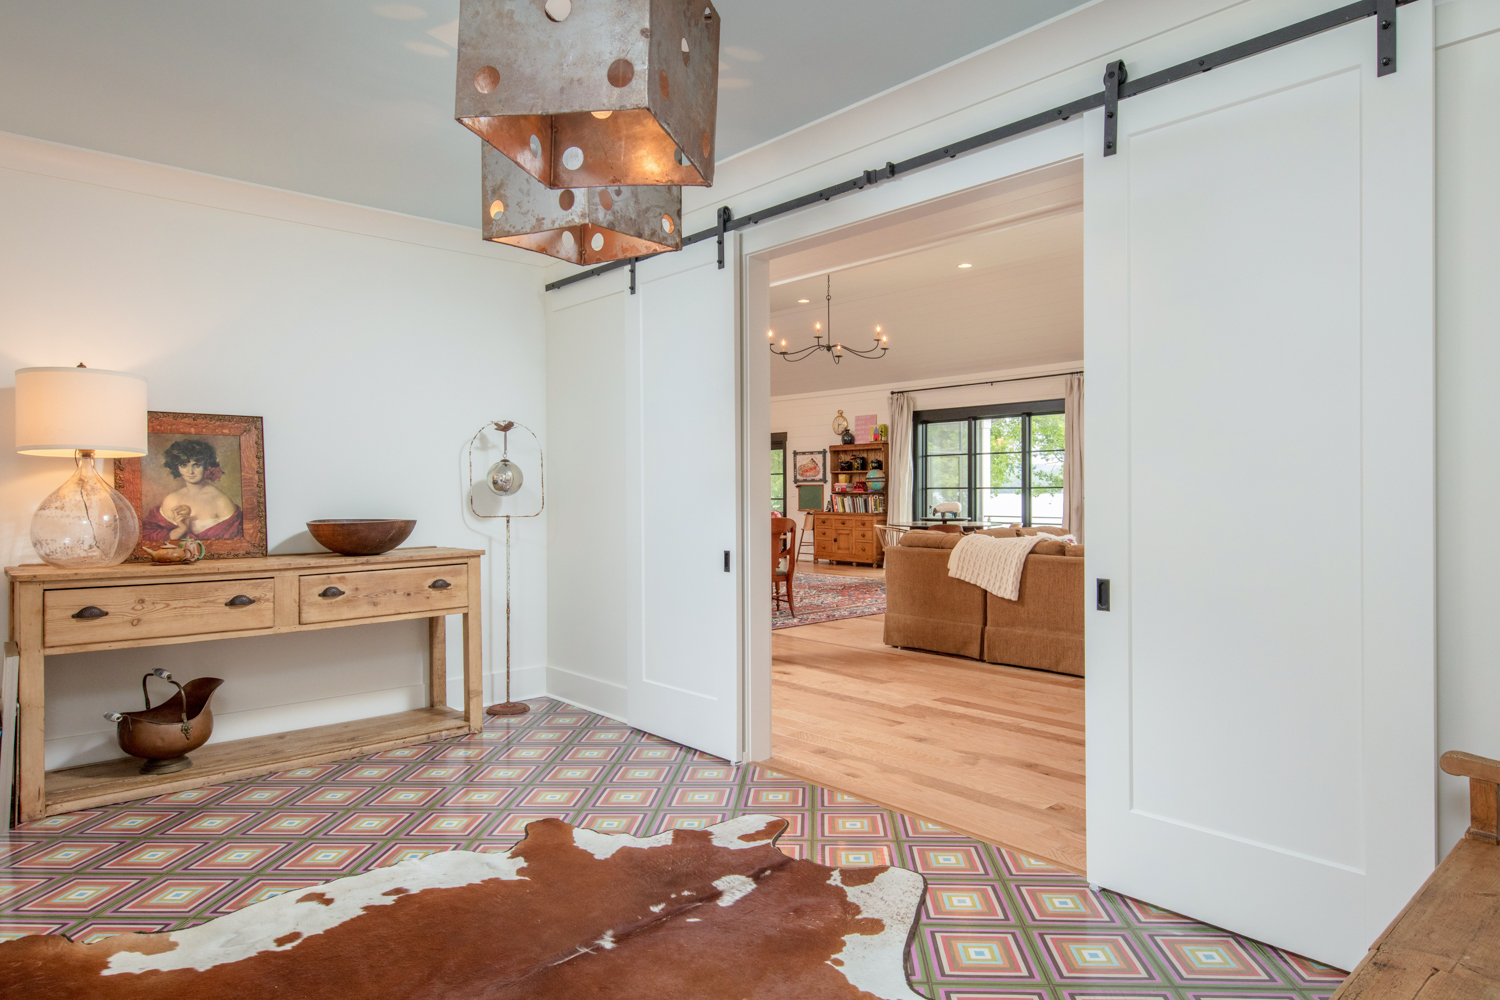 Entryway to home with a cowhide rug.